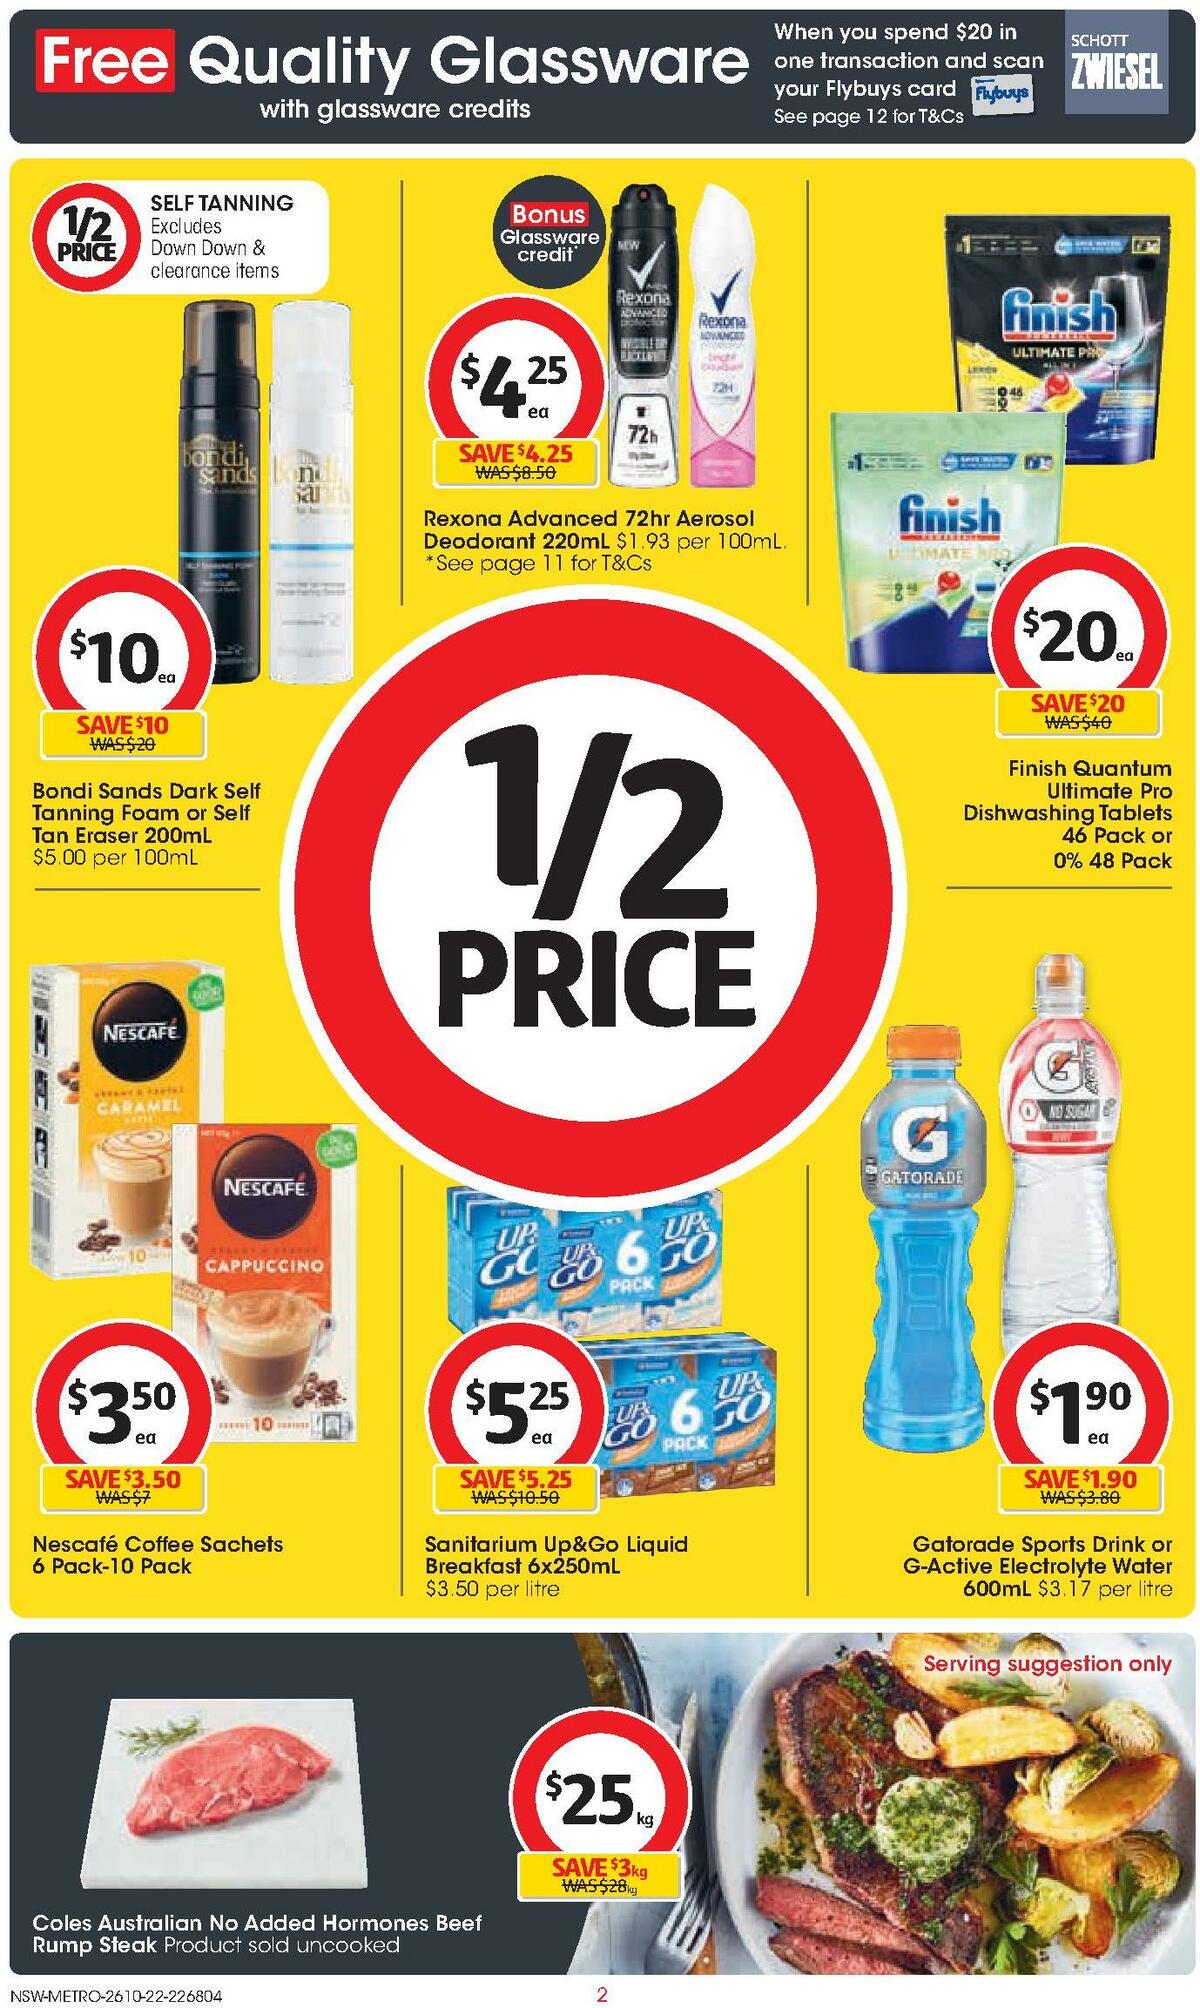 Coles Catalogues from 26 October